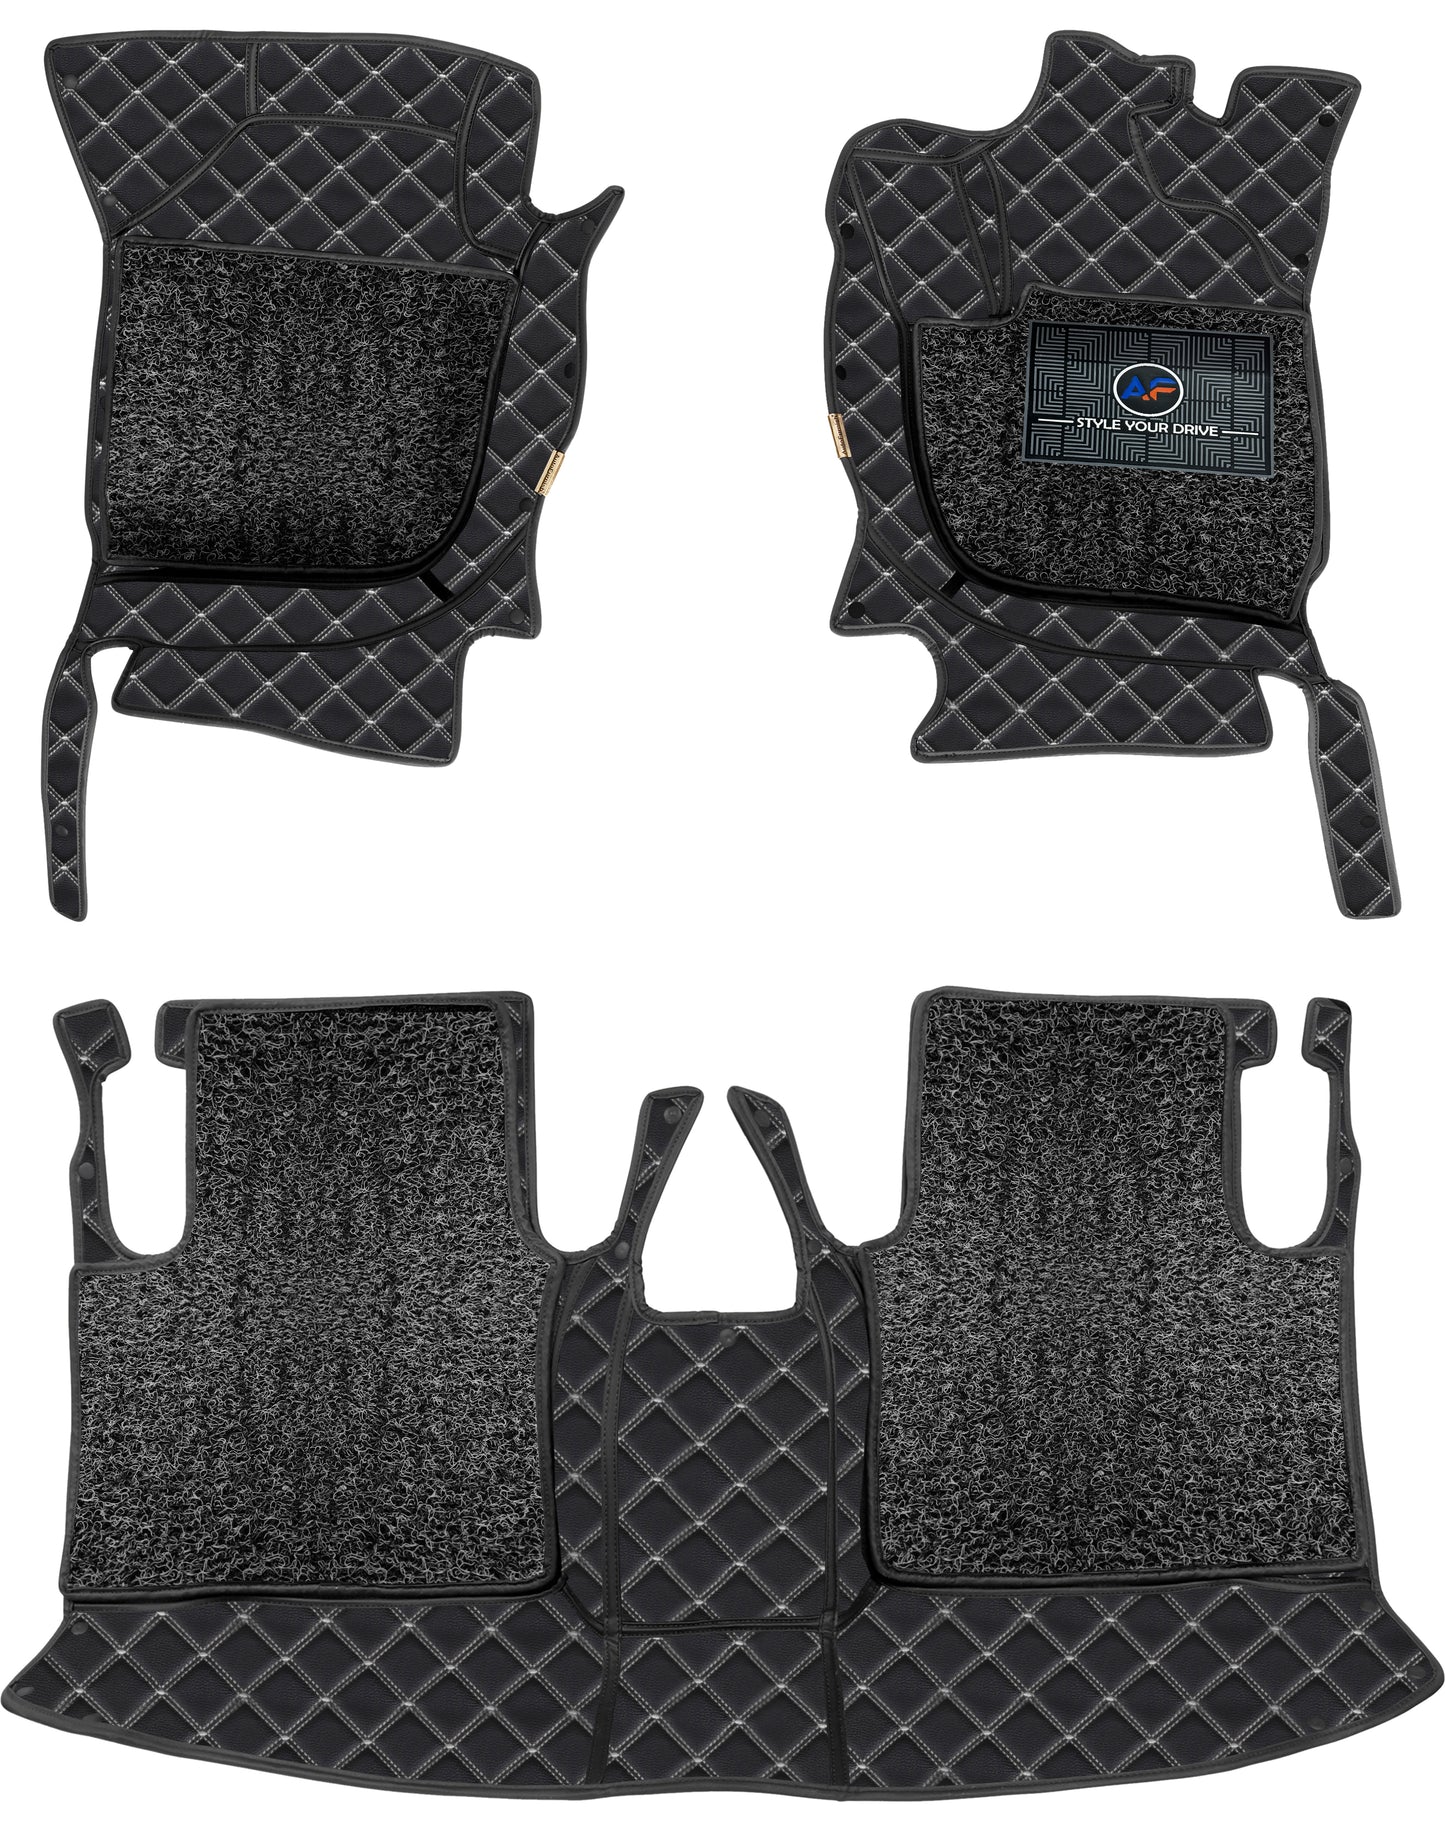 Jeep  Wrangler Rubicon 2020-7D Luxury Car Mat, All Weather Proof, Anti-Skid, 100% Waterproof & Odorless with Unique Diamond Fish Design (24mm Luxury PU Leather, 2 Rows)